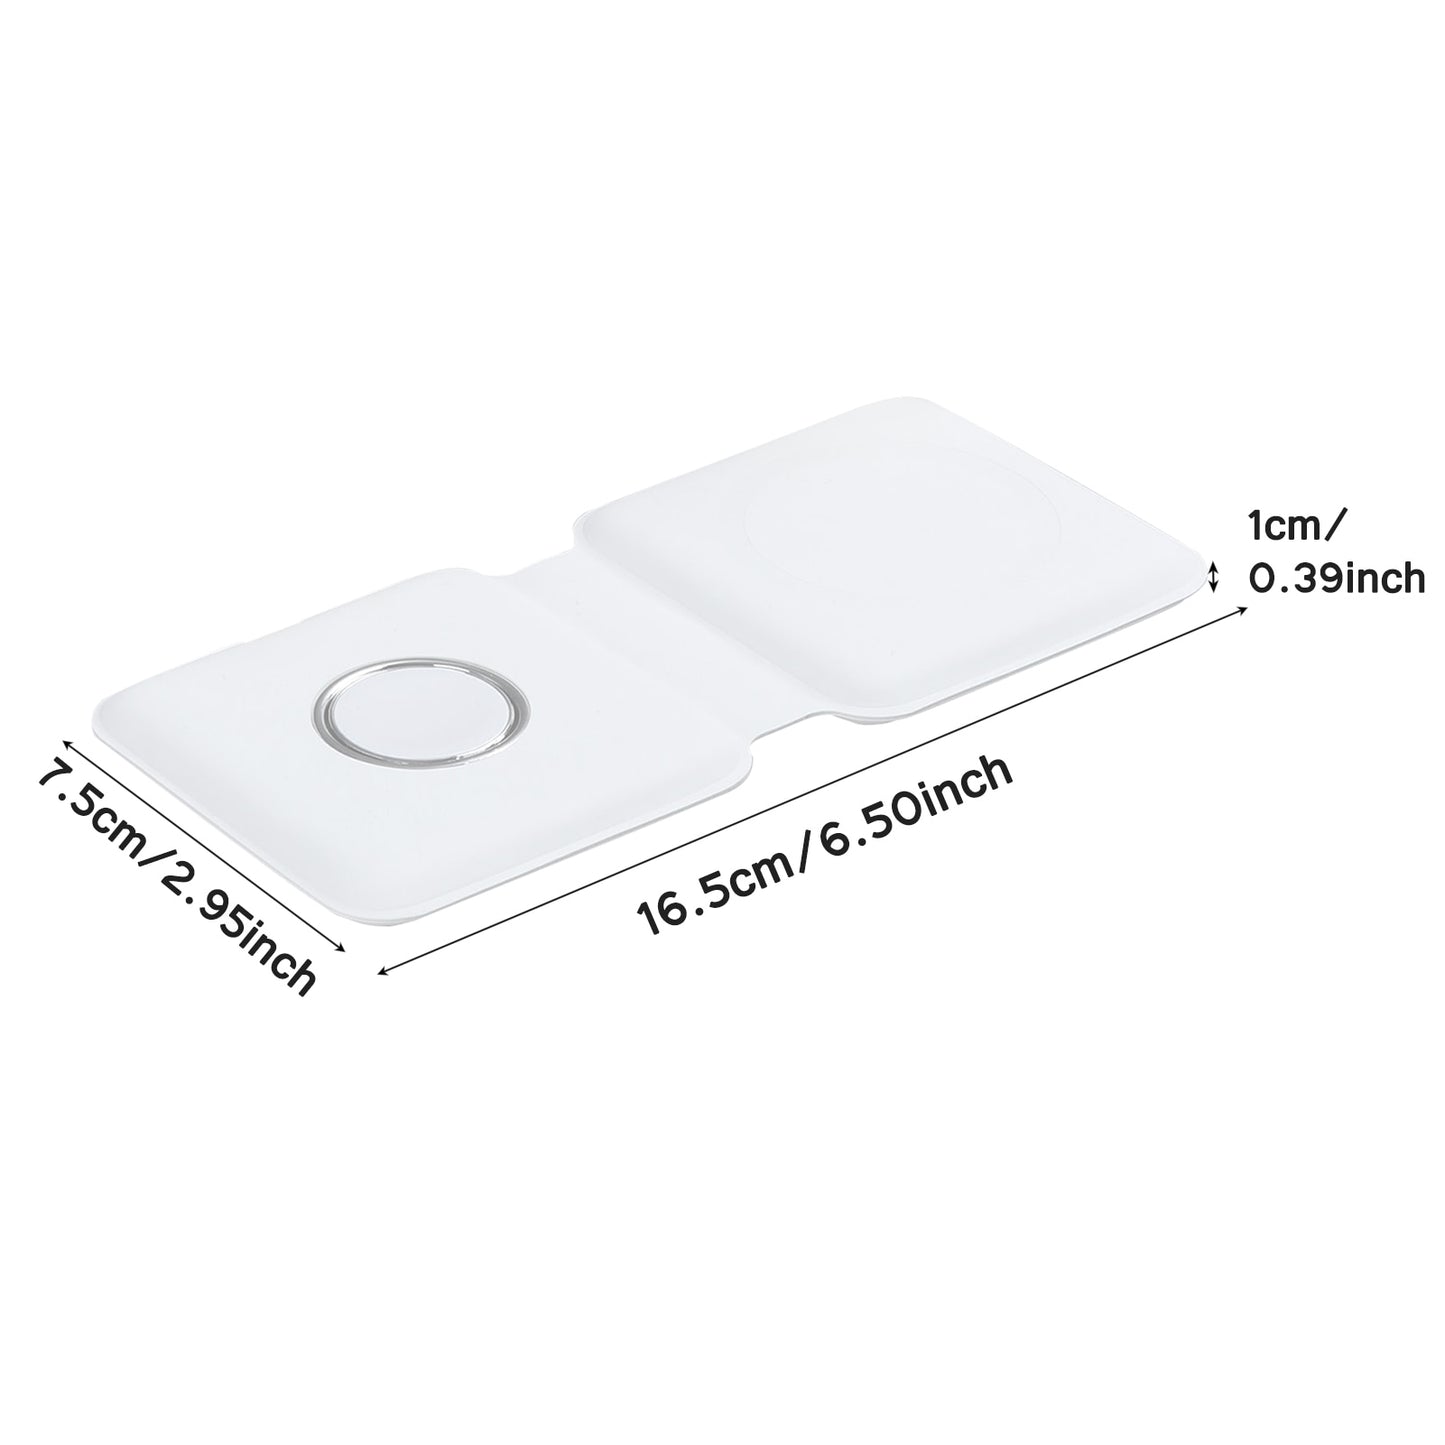 2 in 1 Magnetic Wireless Charging Doc For iPhone, AirPods, Apple Watch